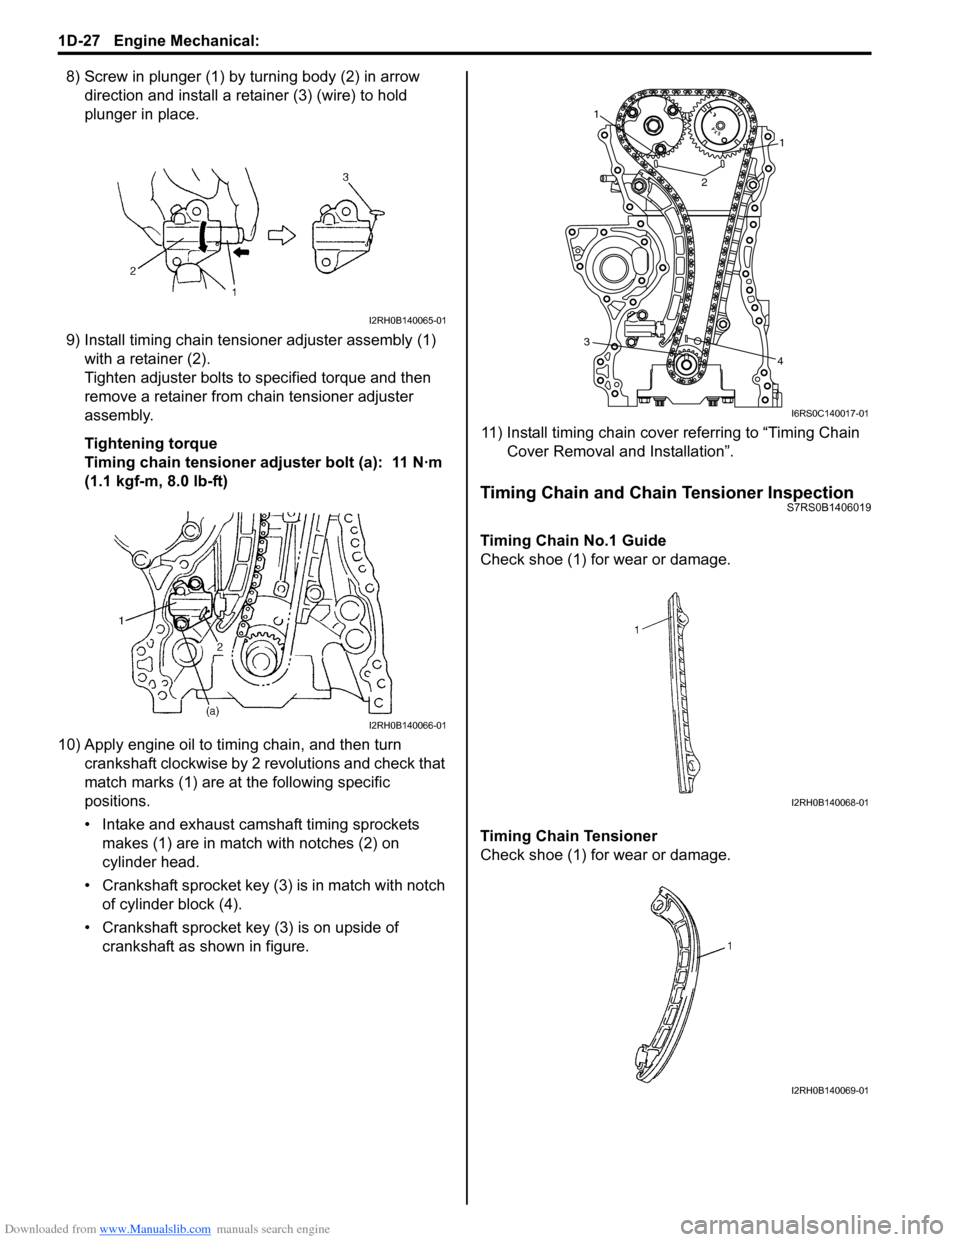 SUZUKI SWIFT 2006 2.G Service User Guide Downloaded from www.Manualslib.com manuals search engine 1D-27 Engine Mechanical: 
8) Screw in plunger (1) by turning body (2) in arrow direction and install a reta iner (3) (wire) to hold 
plunger in